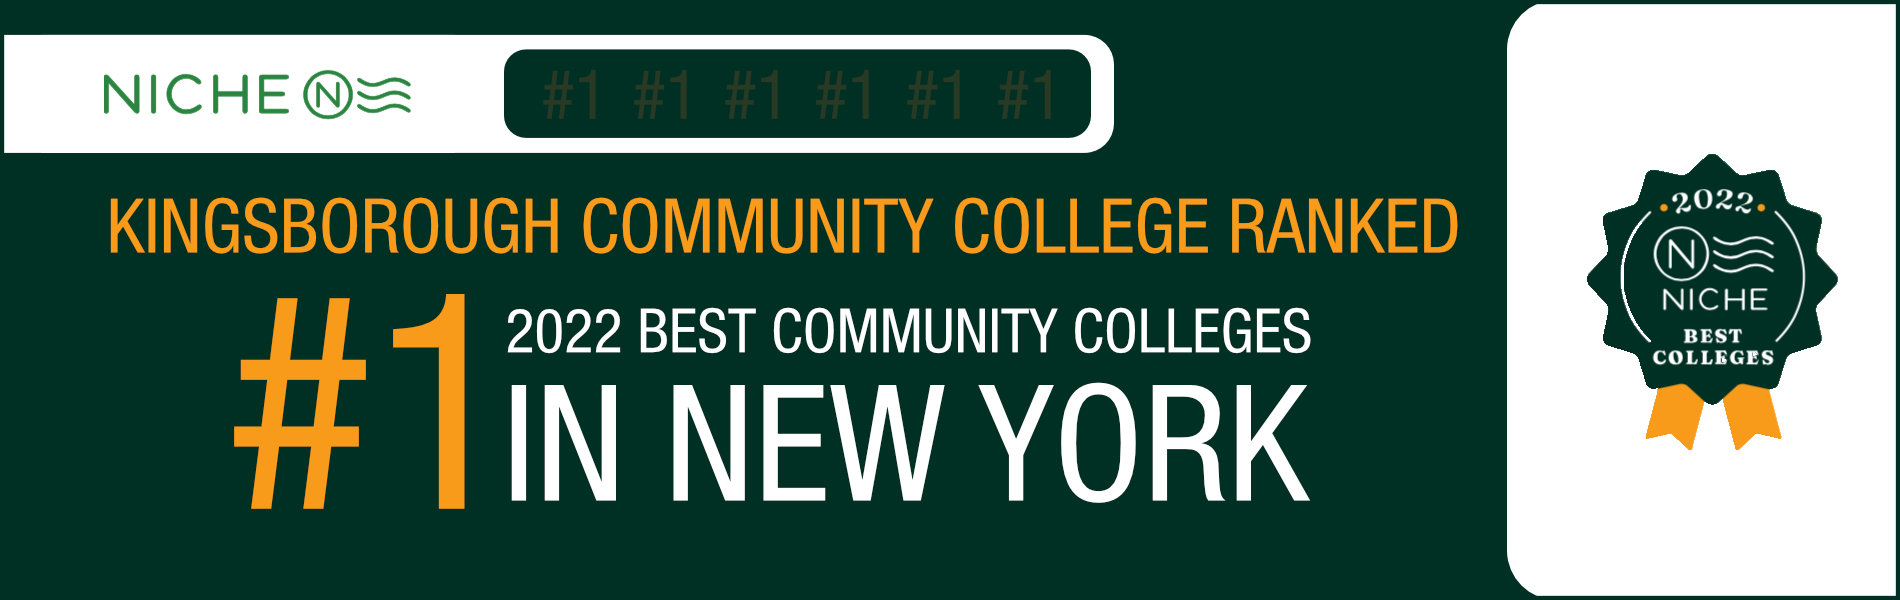 #1 in Best Community Colleges in New York